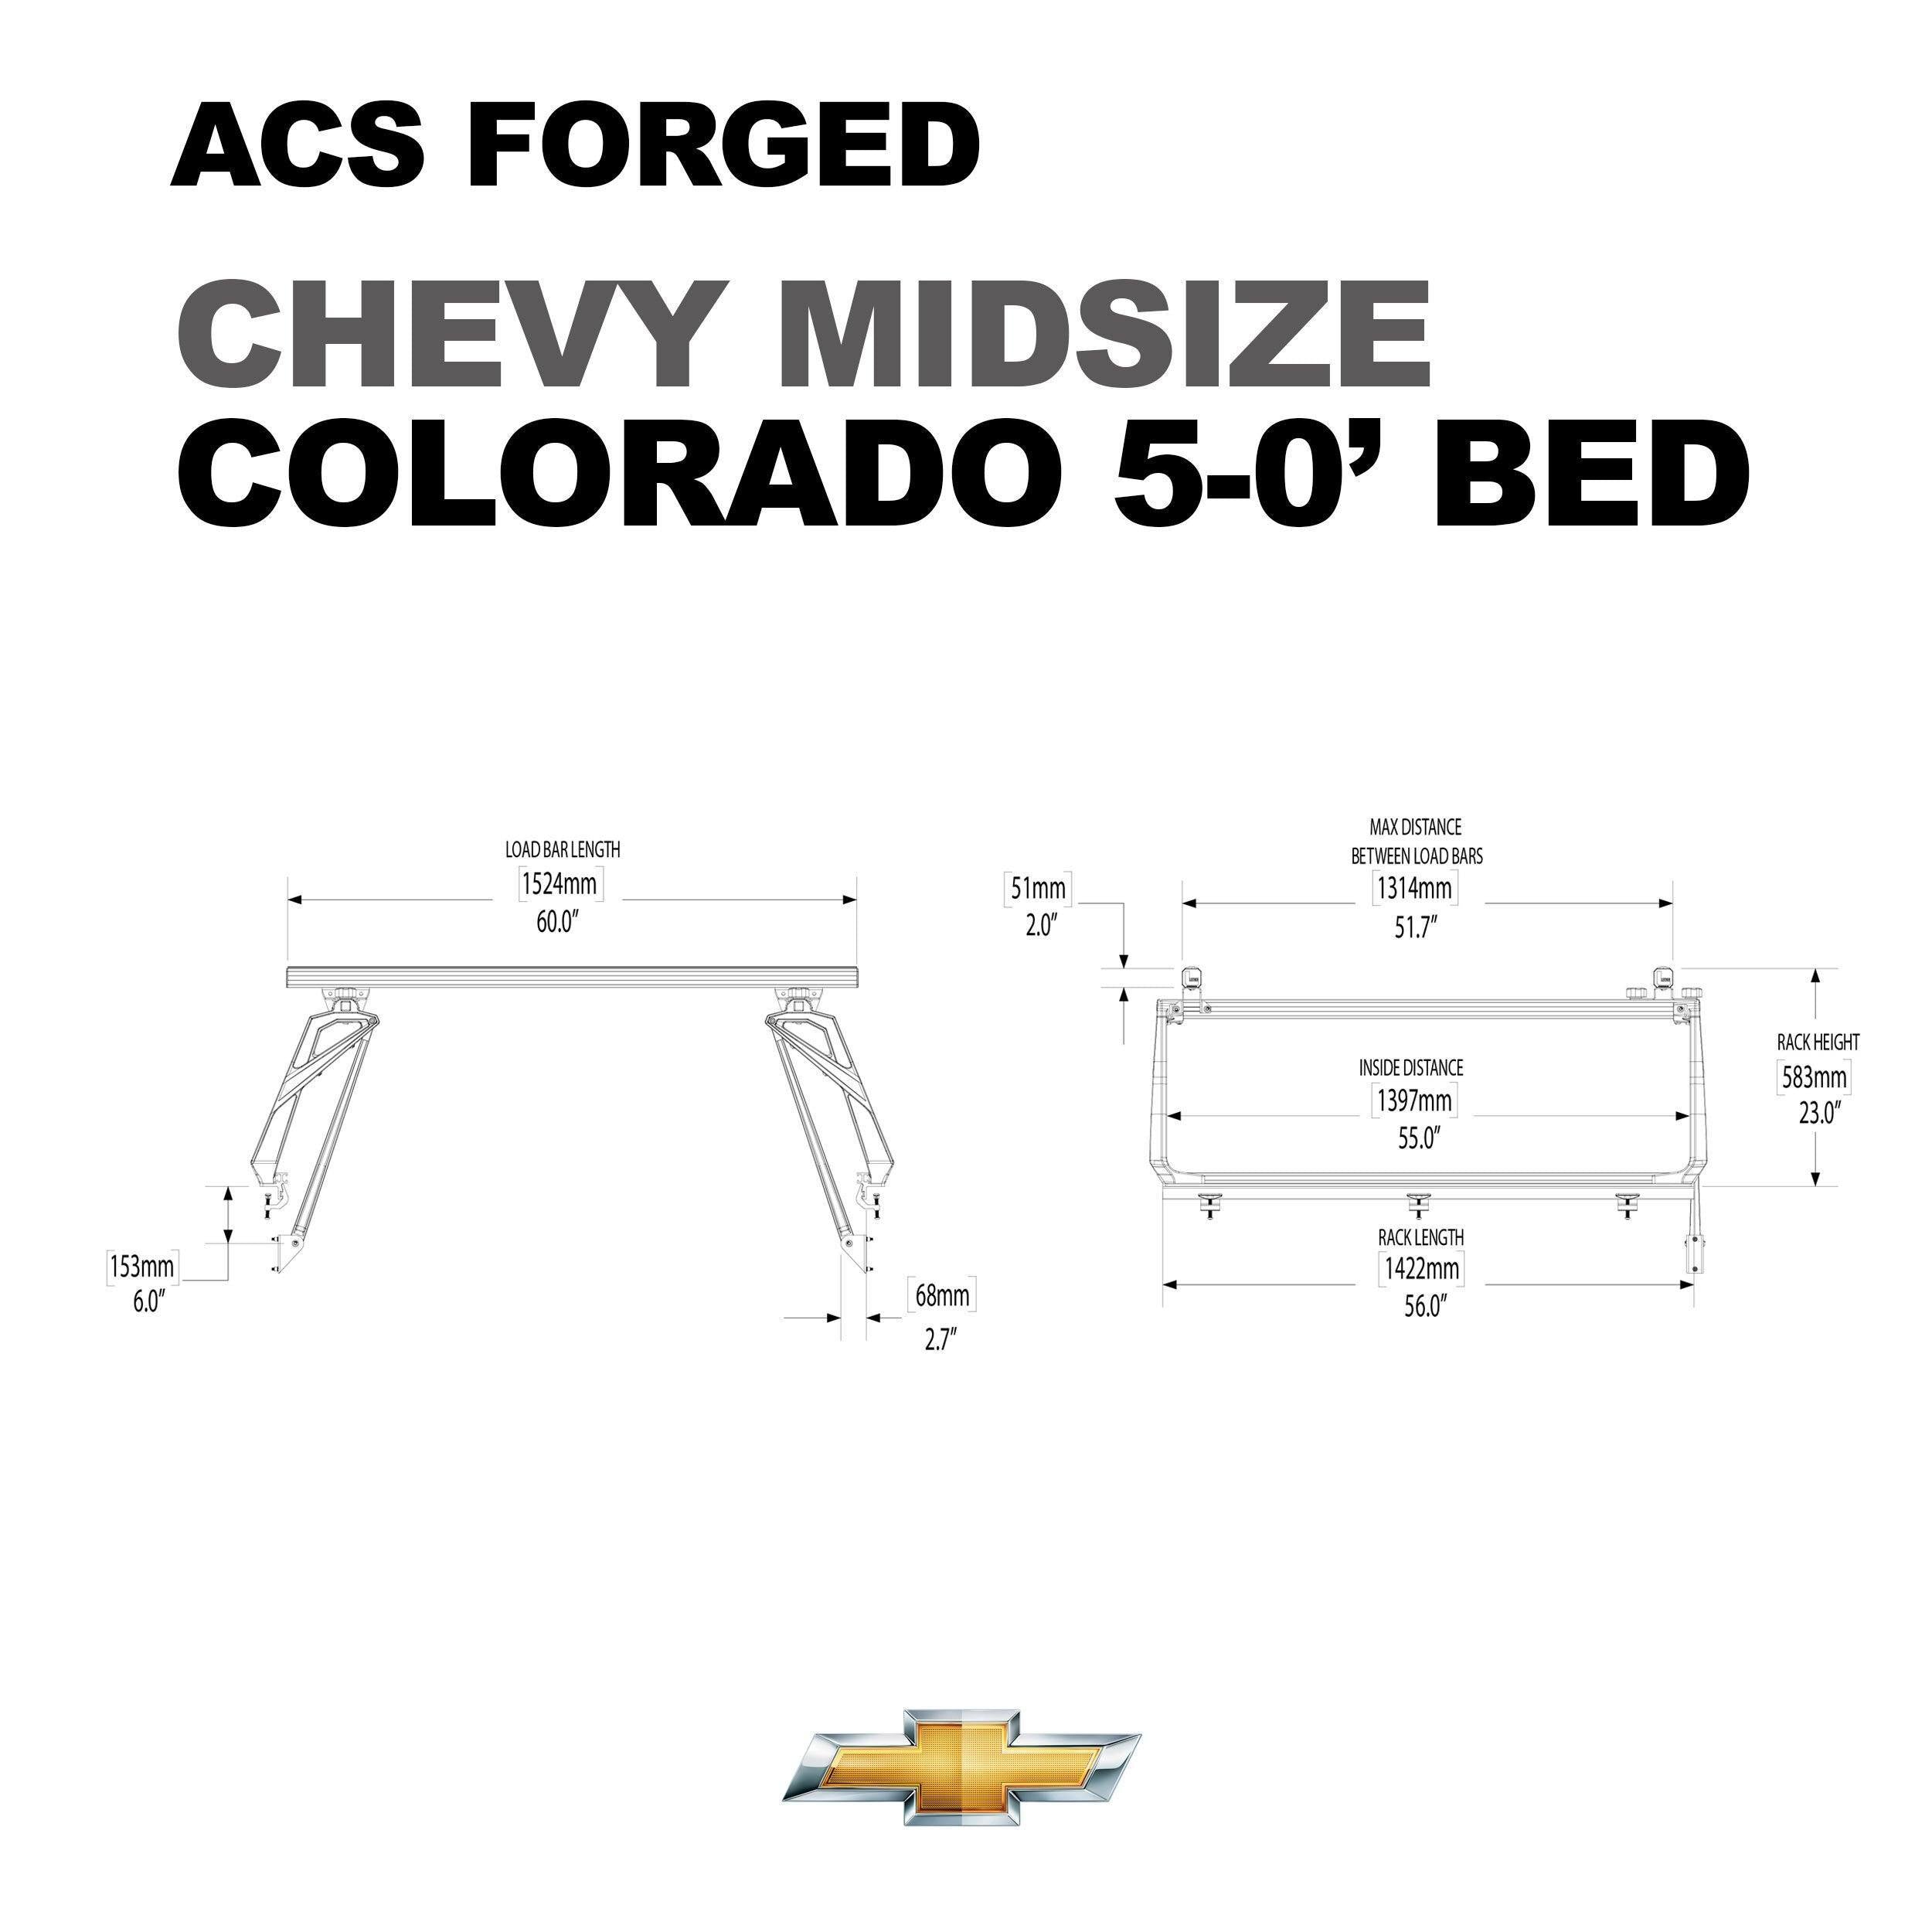 '15-23 Chevy/GMC Colorado/Canyon-ACS Forged Bed Accessories Leitner Designs design